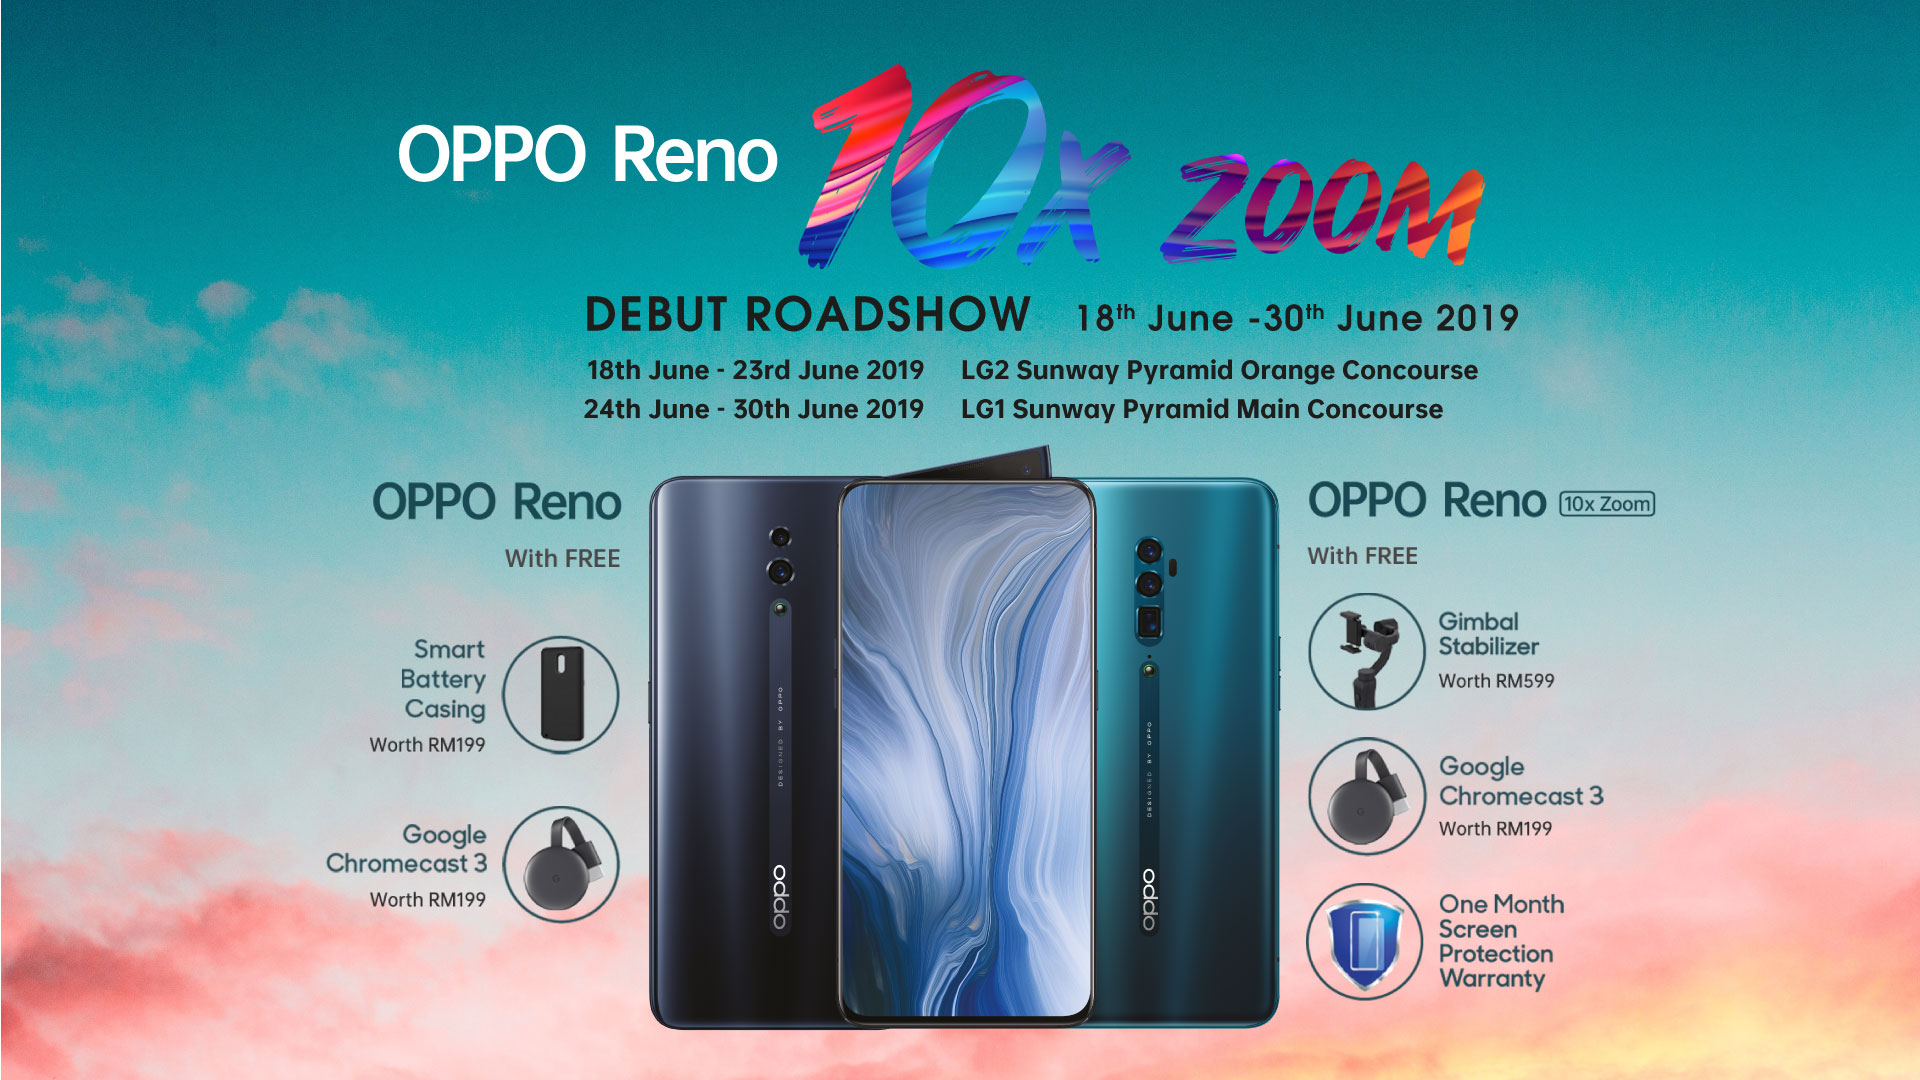 OPPO Reno ranked No.1 best selling smartphone in major telco stores 5 1